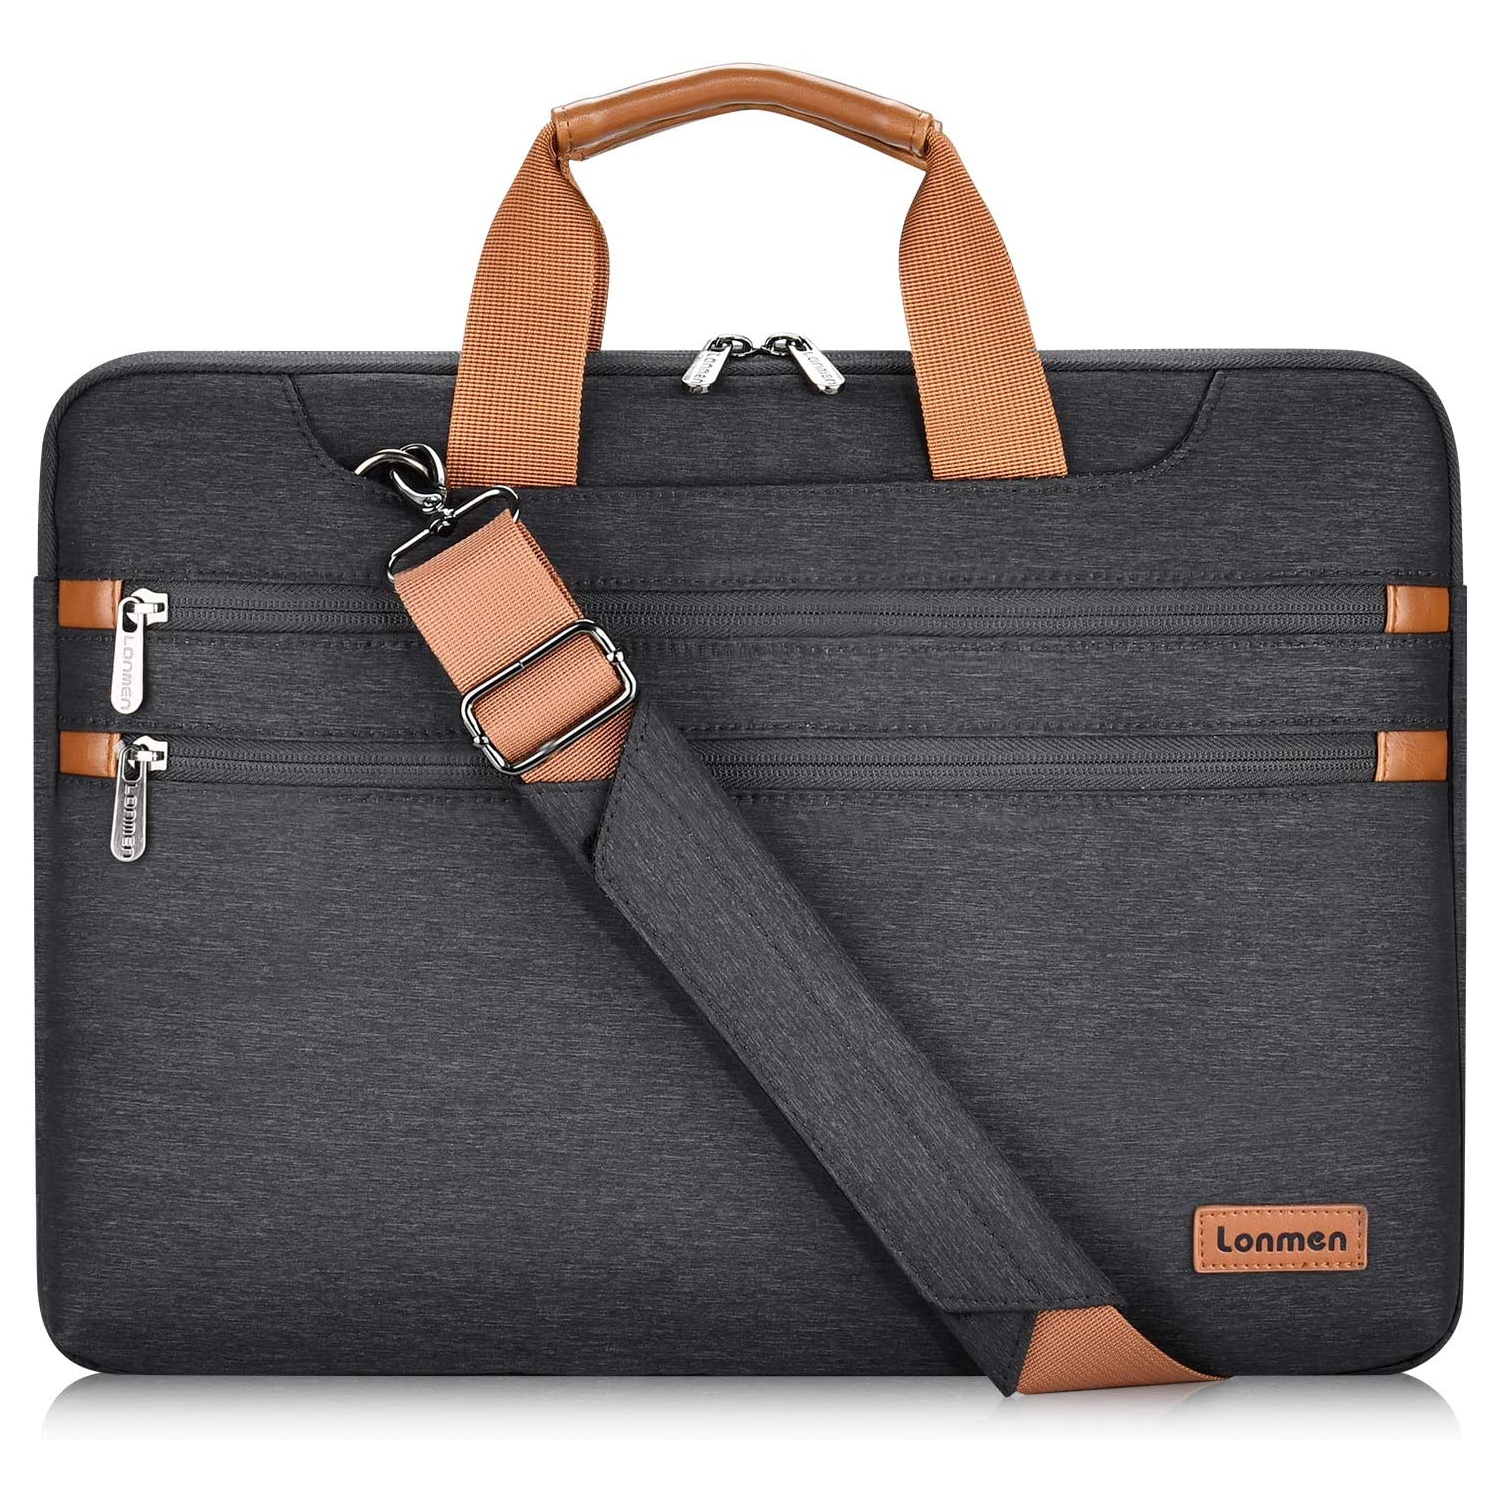 17.3 Inch Laptop Shoulder Bag,Computer Sleeve Carrying Case for 17.3" Lenovo IdeaPad 330 / Dell Inspiron 17 5000